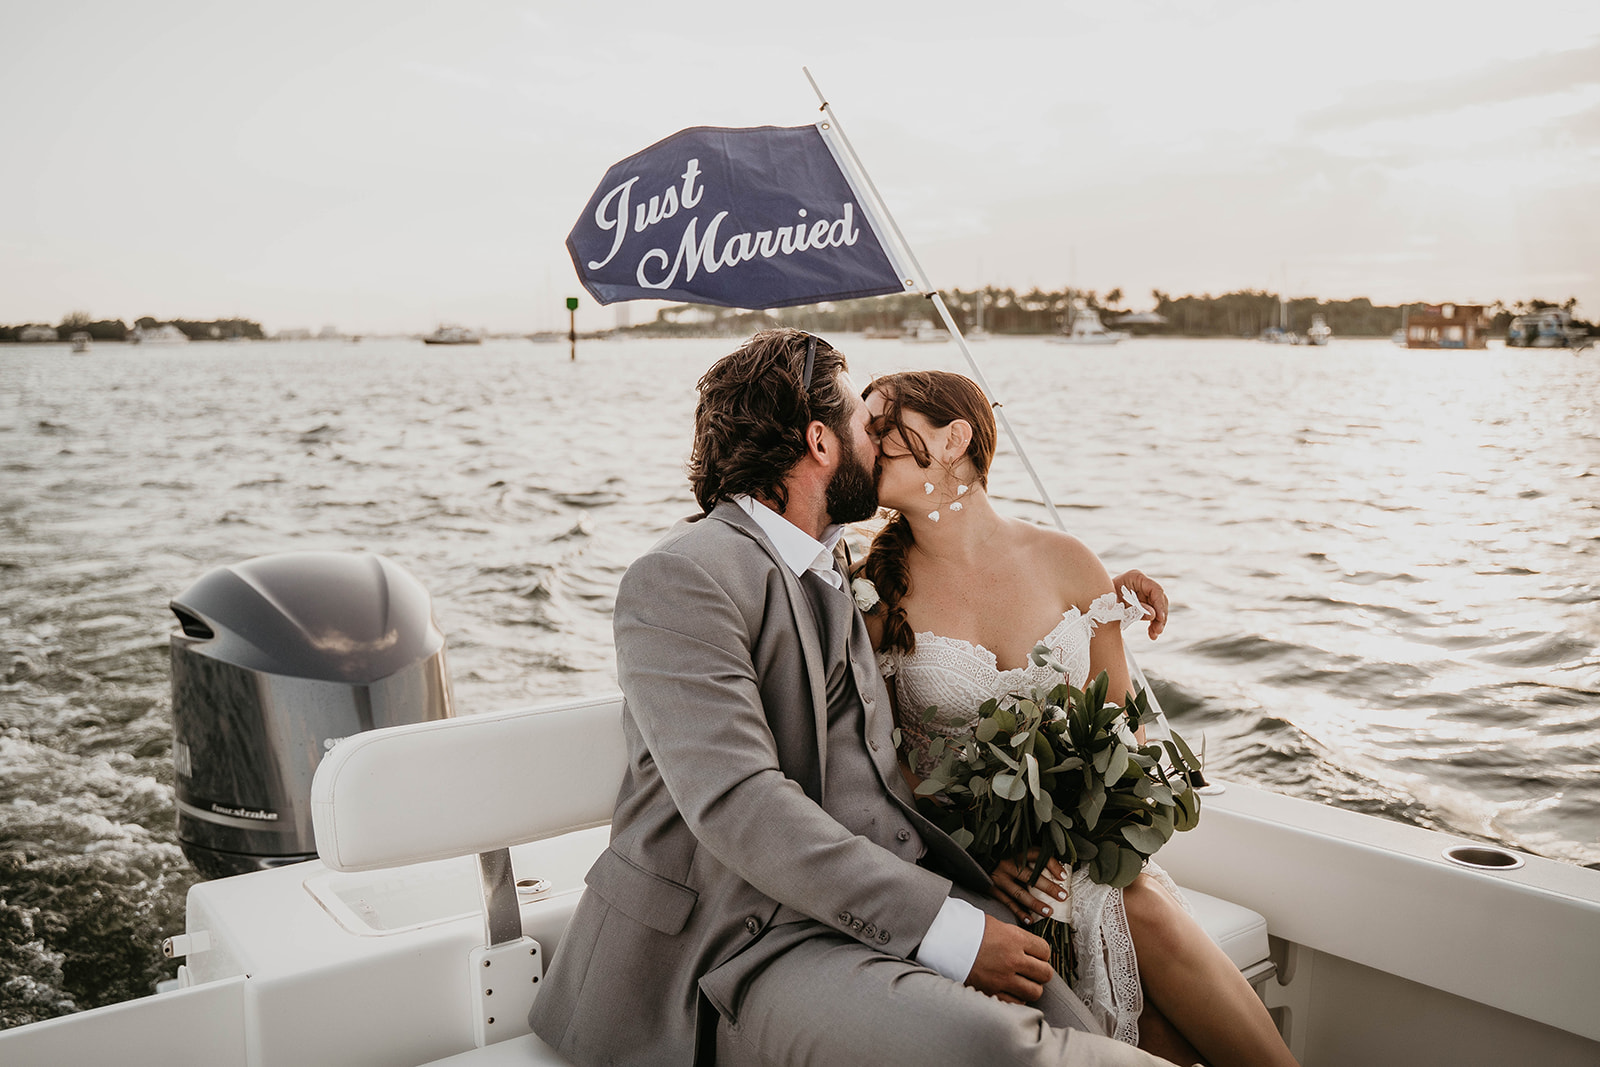 Waterfront Boat Bride and Groom Wedding Portraits